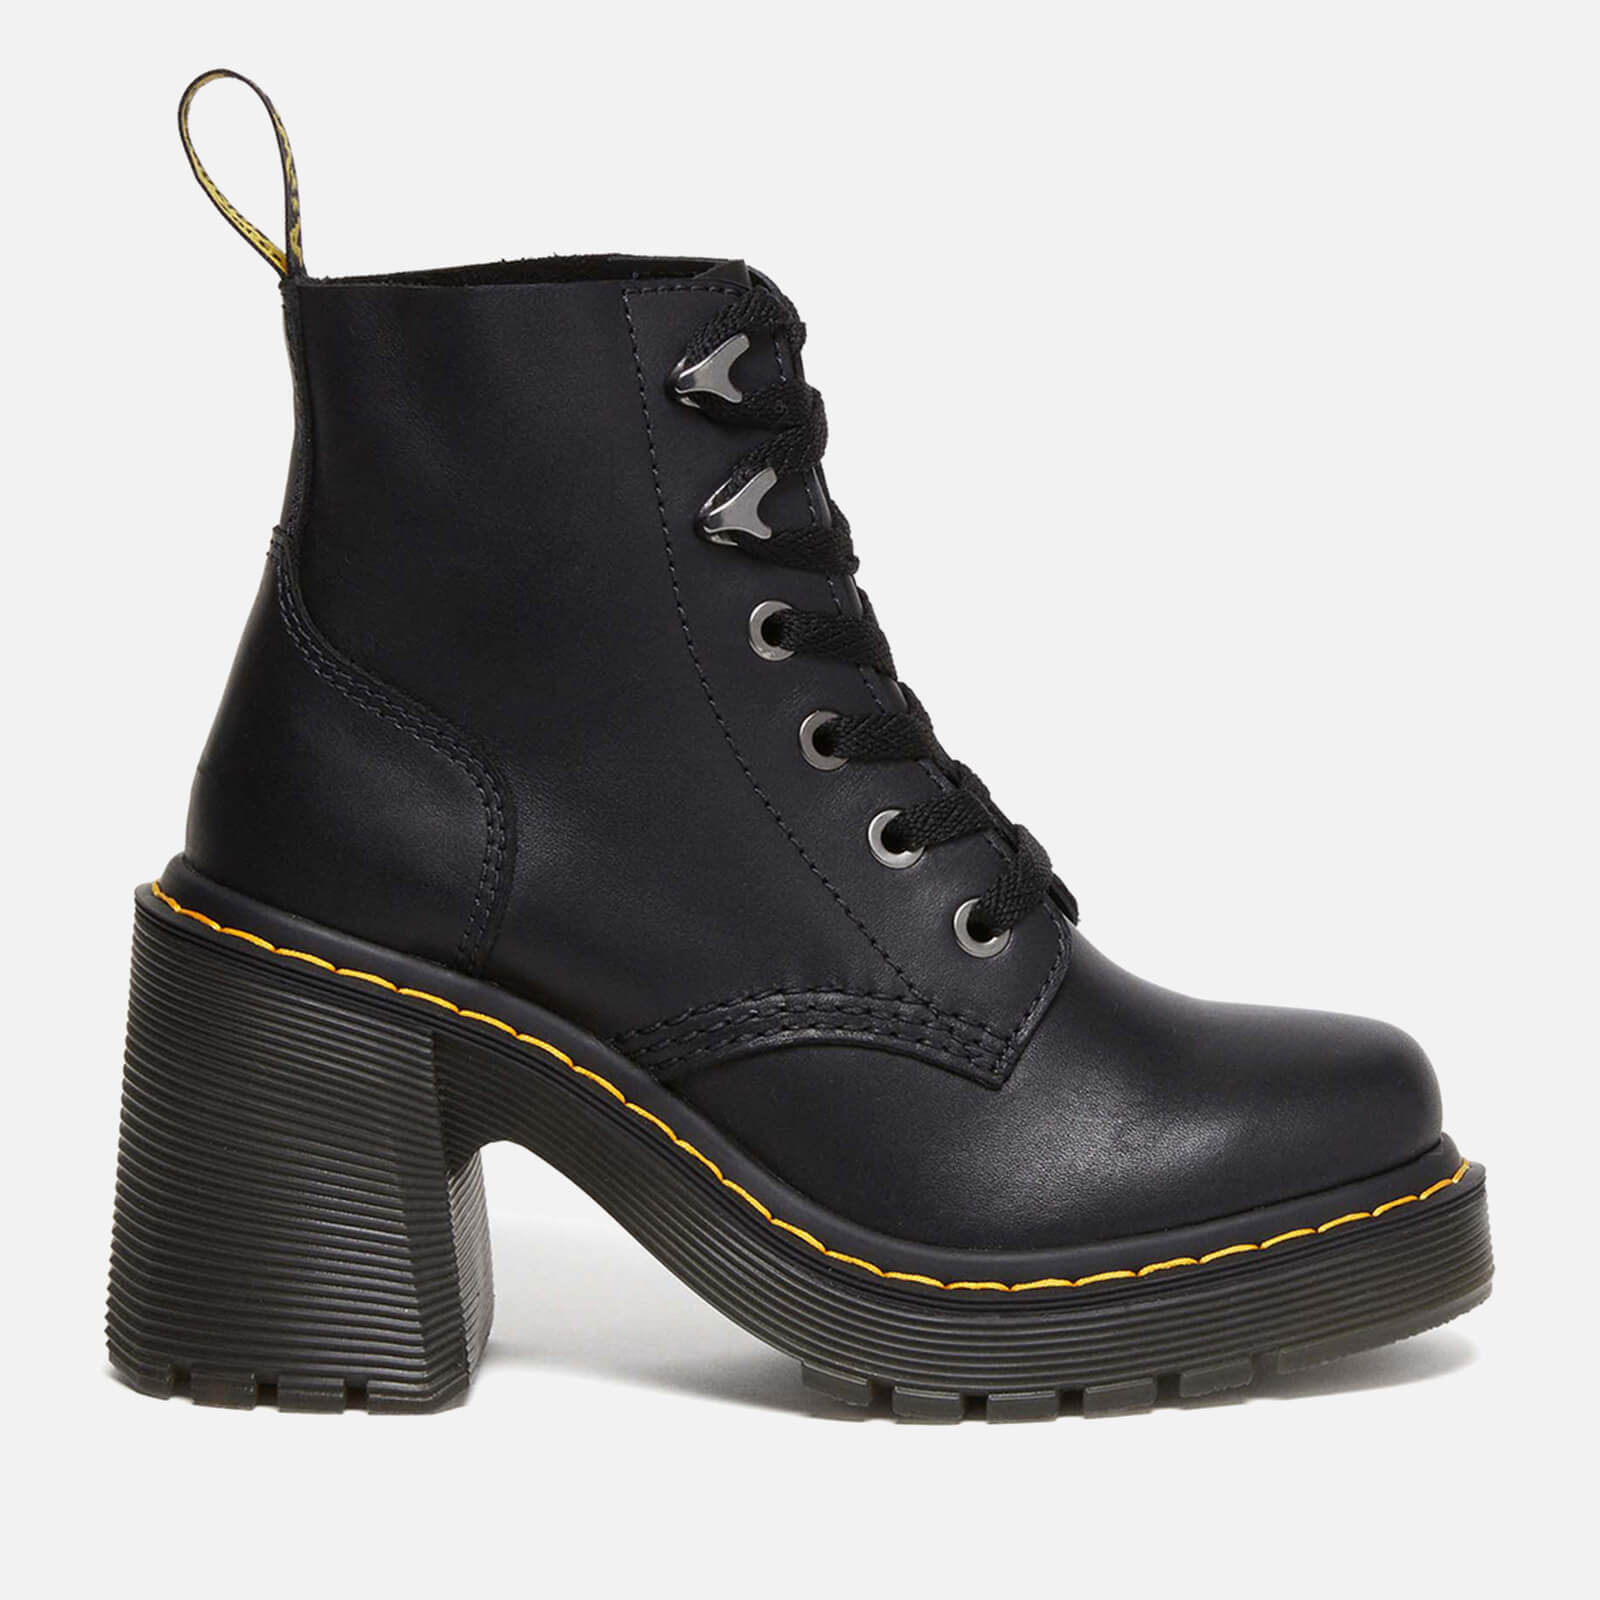 Dr. Martens Women's Jesy Leather Heeled Lace Up Boots - Black - UK 5